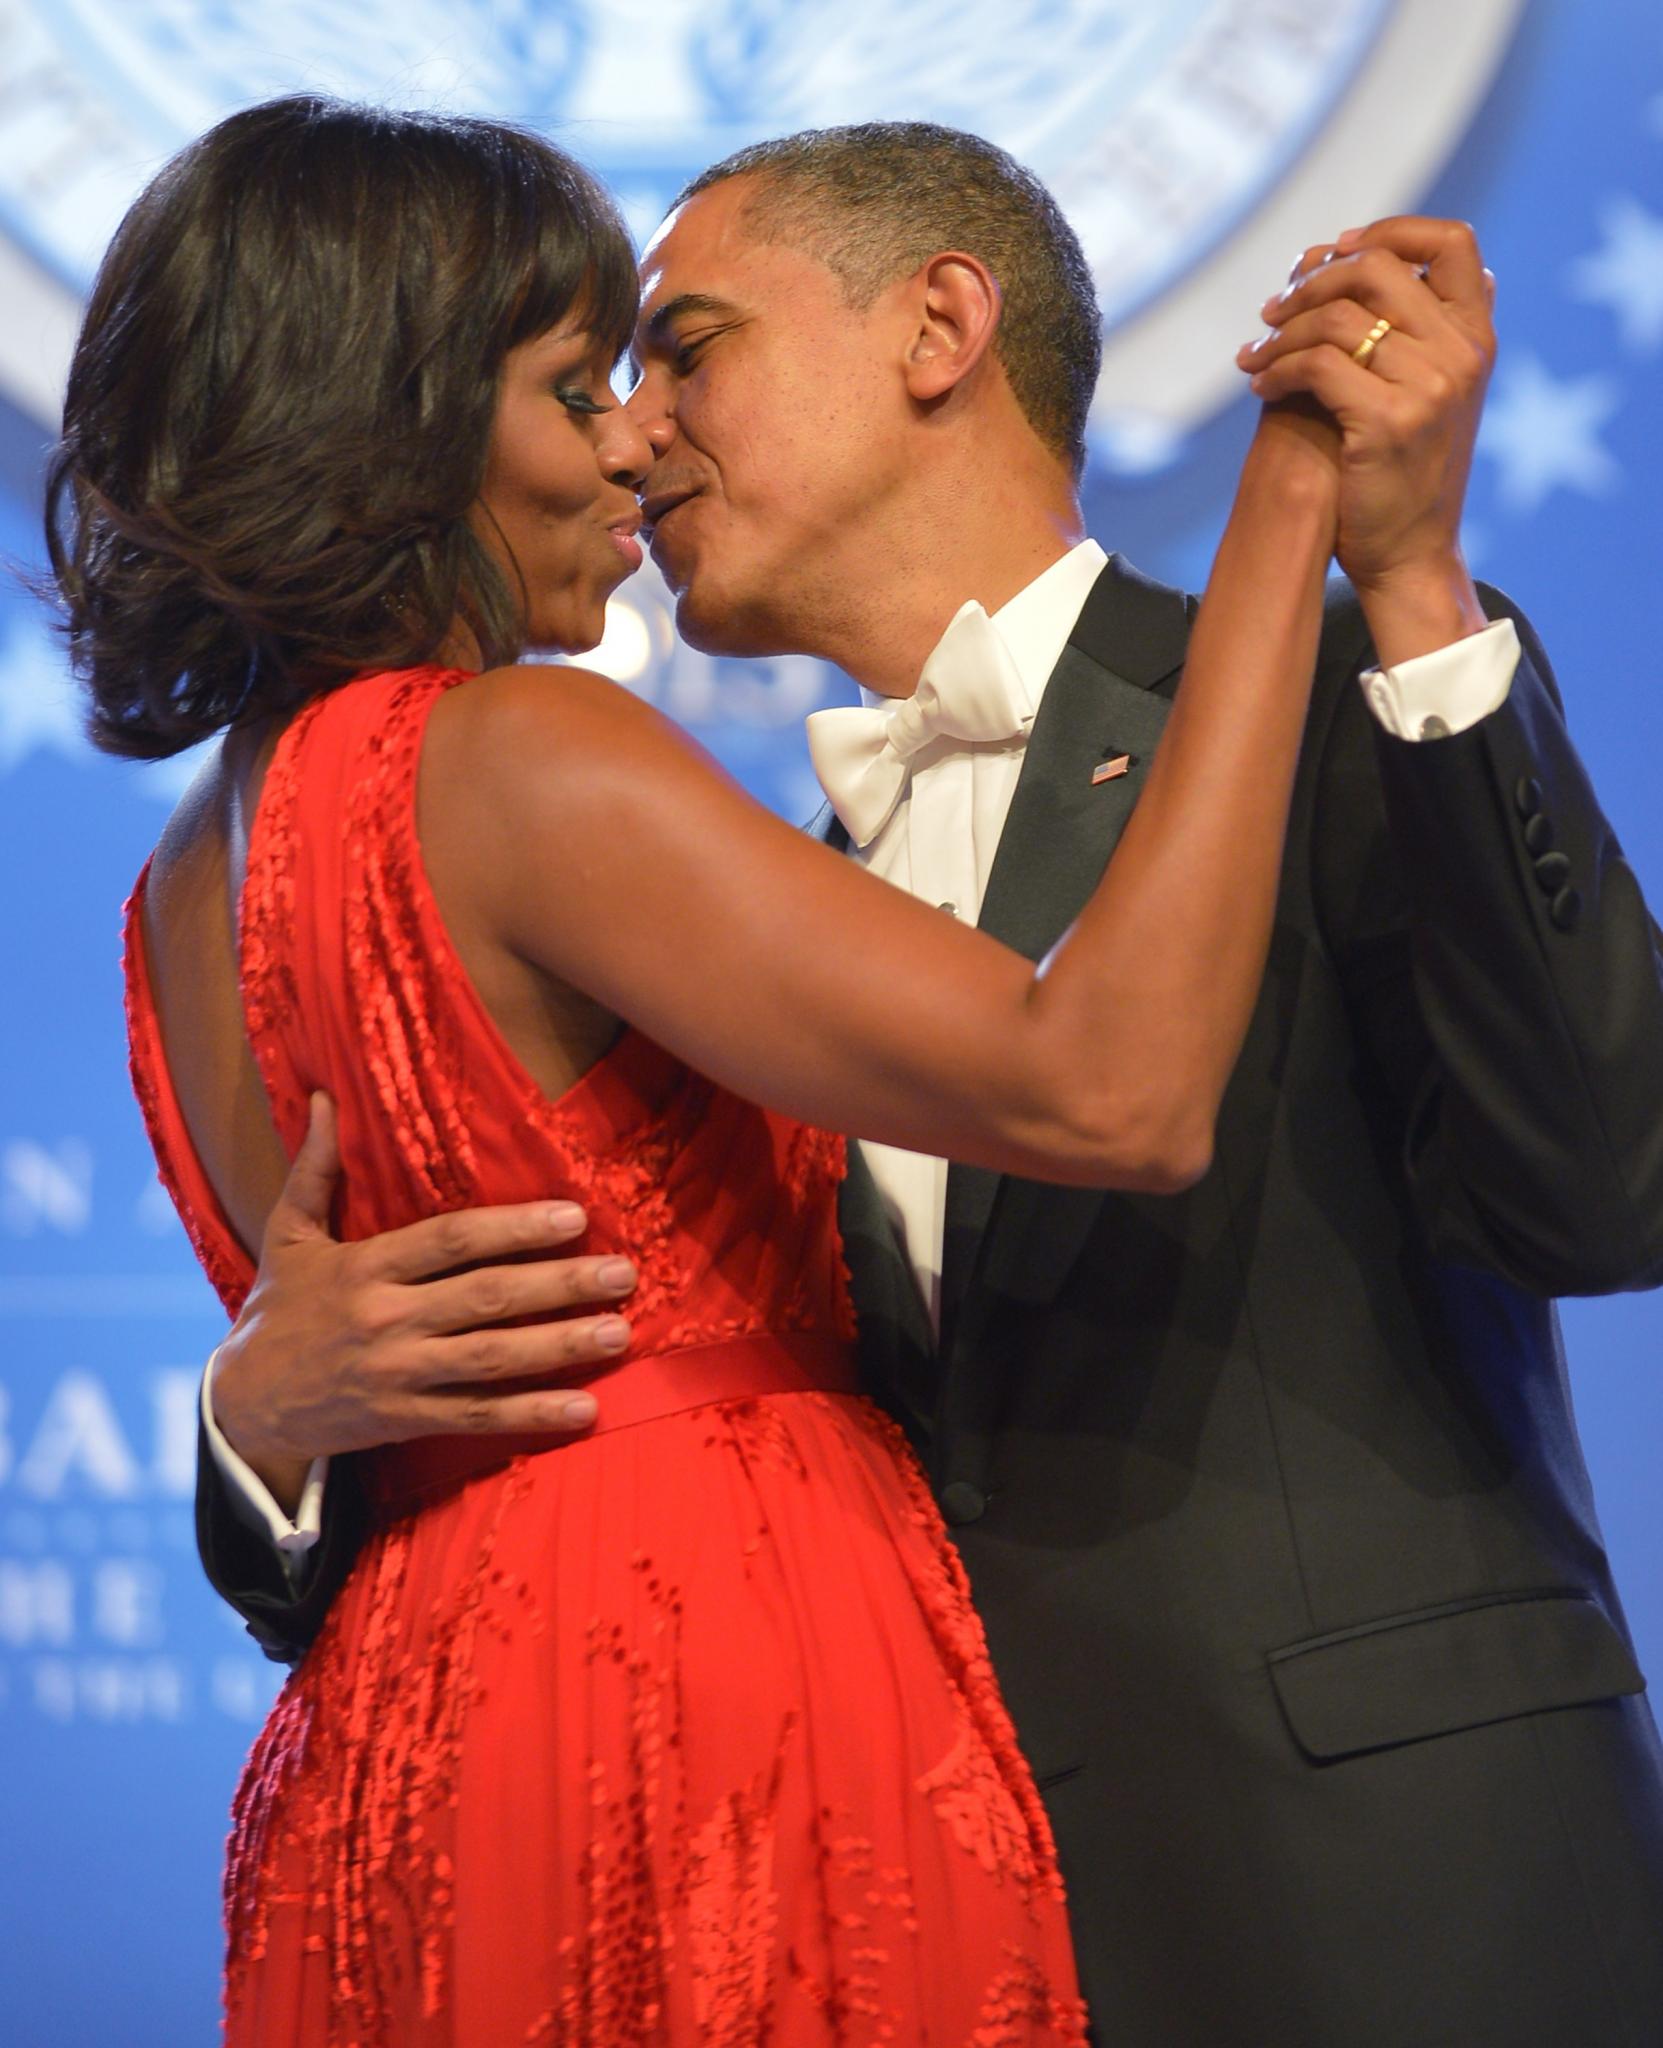 Watch Barack and Michelle Obama's First Dance